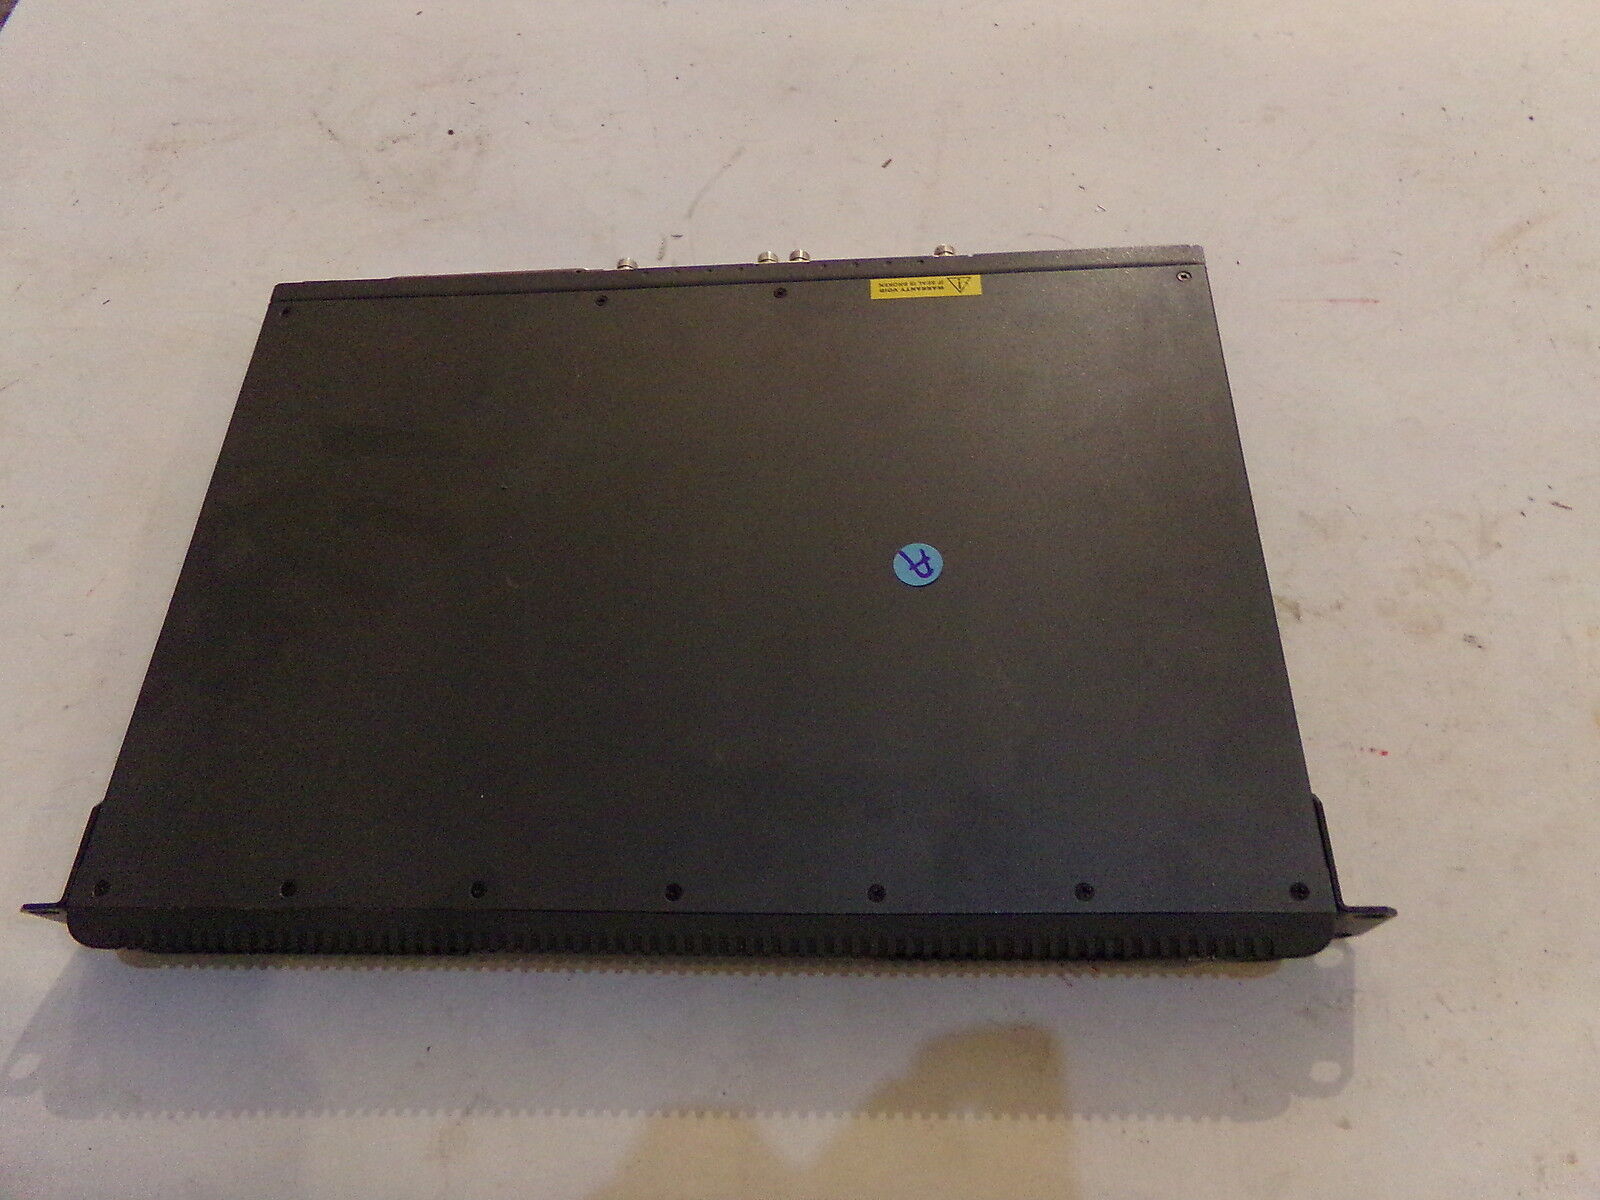 3COM Wired Router 5012 3C13701 - USED (NO CORDS INCLUDED)